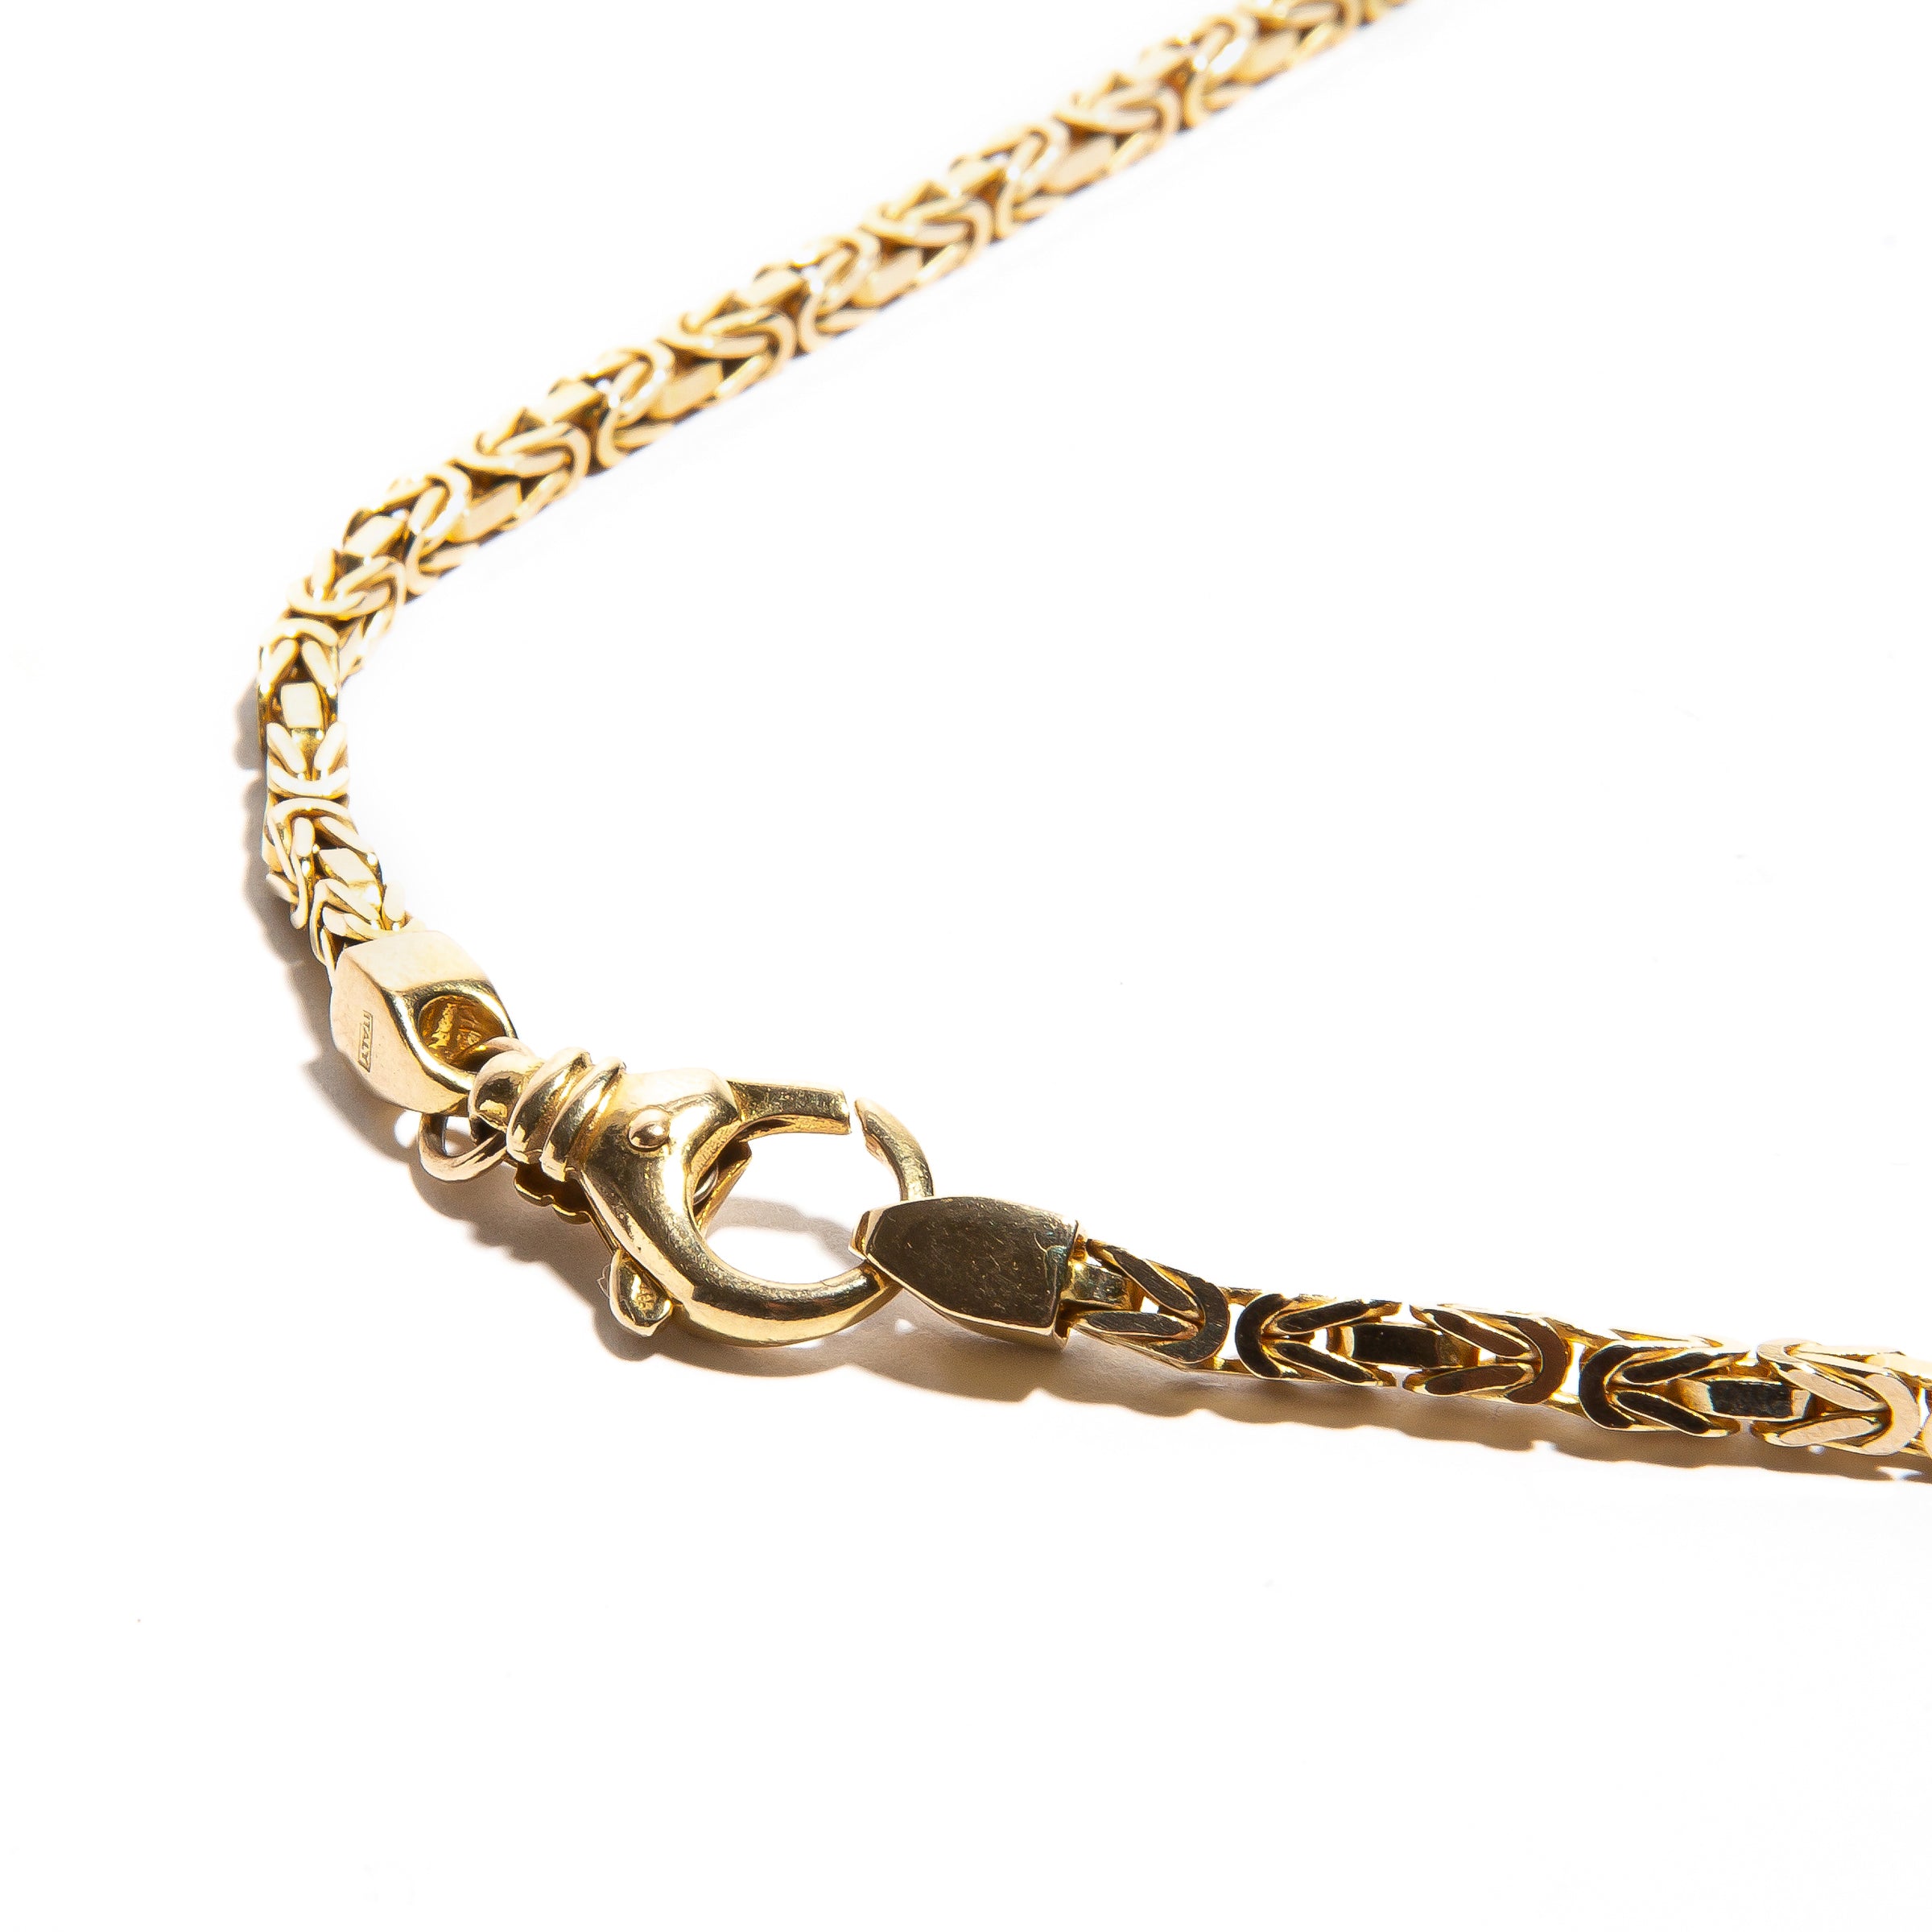 THE KING'S LINK: Vintage Byzantine Chain